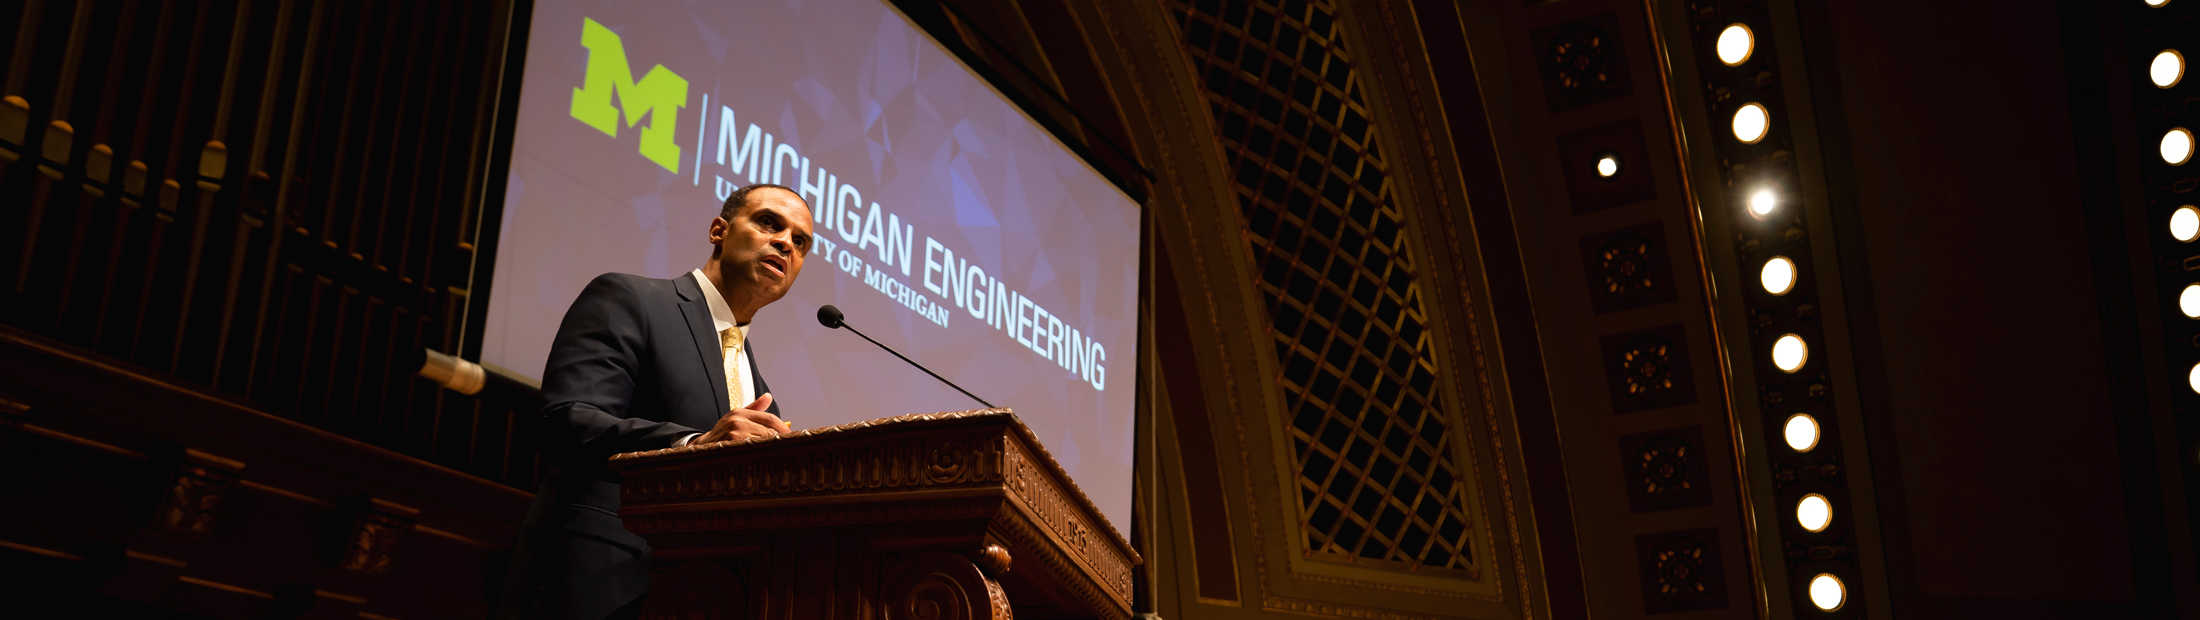 Alec D. Gallimore speaks at the Michigan Engineering Graduate Student Orientation in 2019